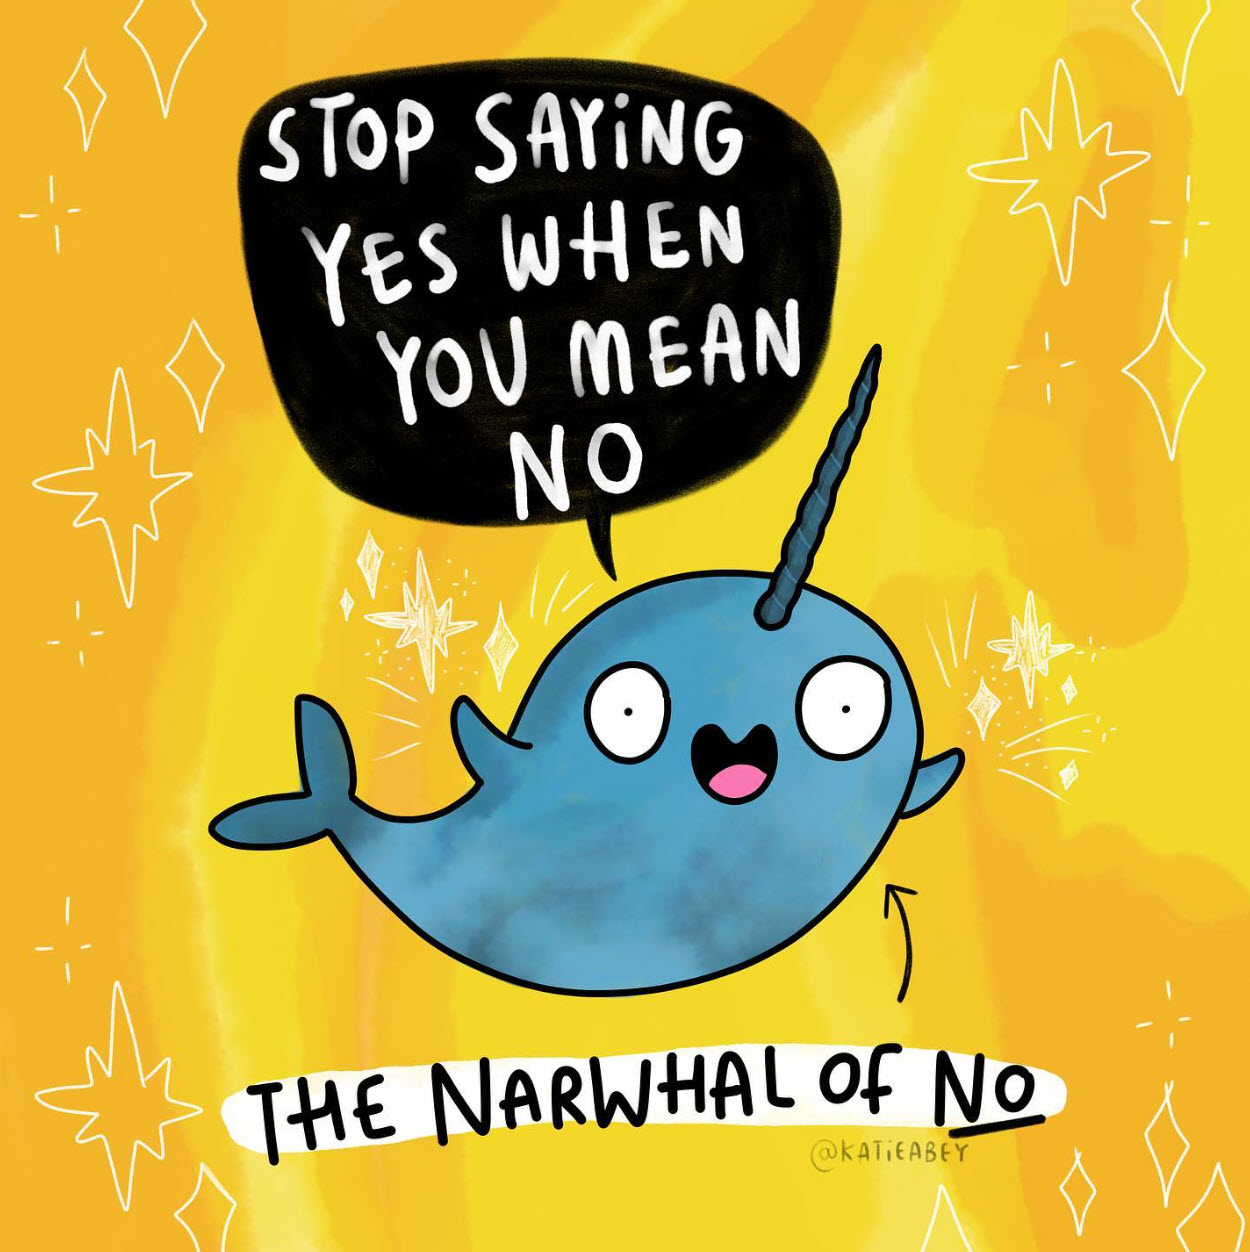 blue narwhal on yellow background saying "stop saying yes when you mean no"